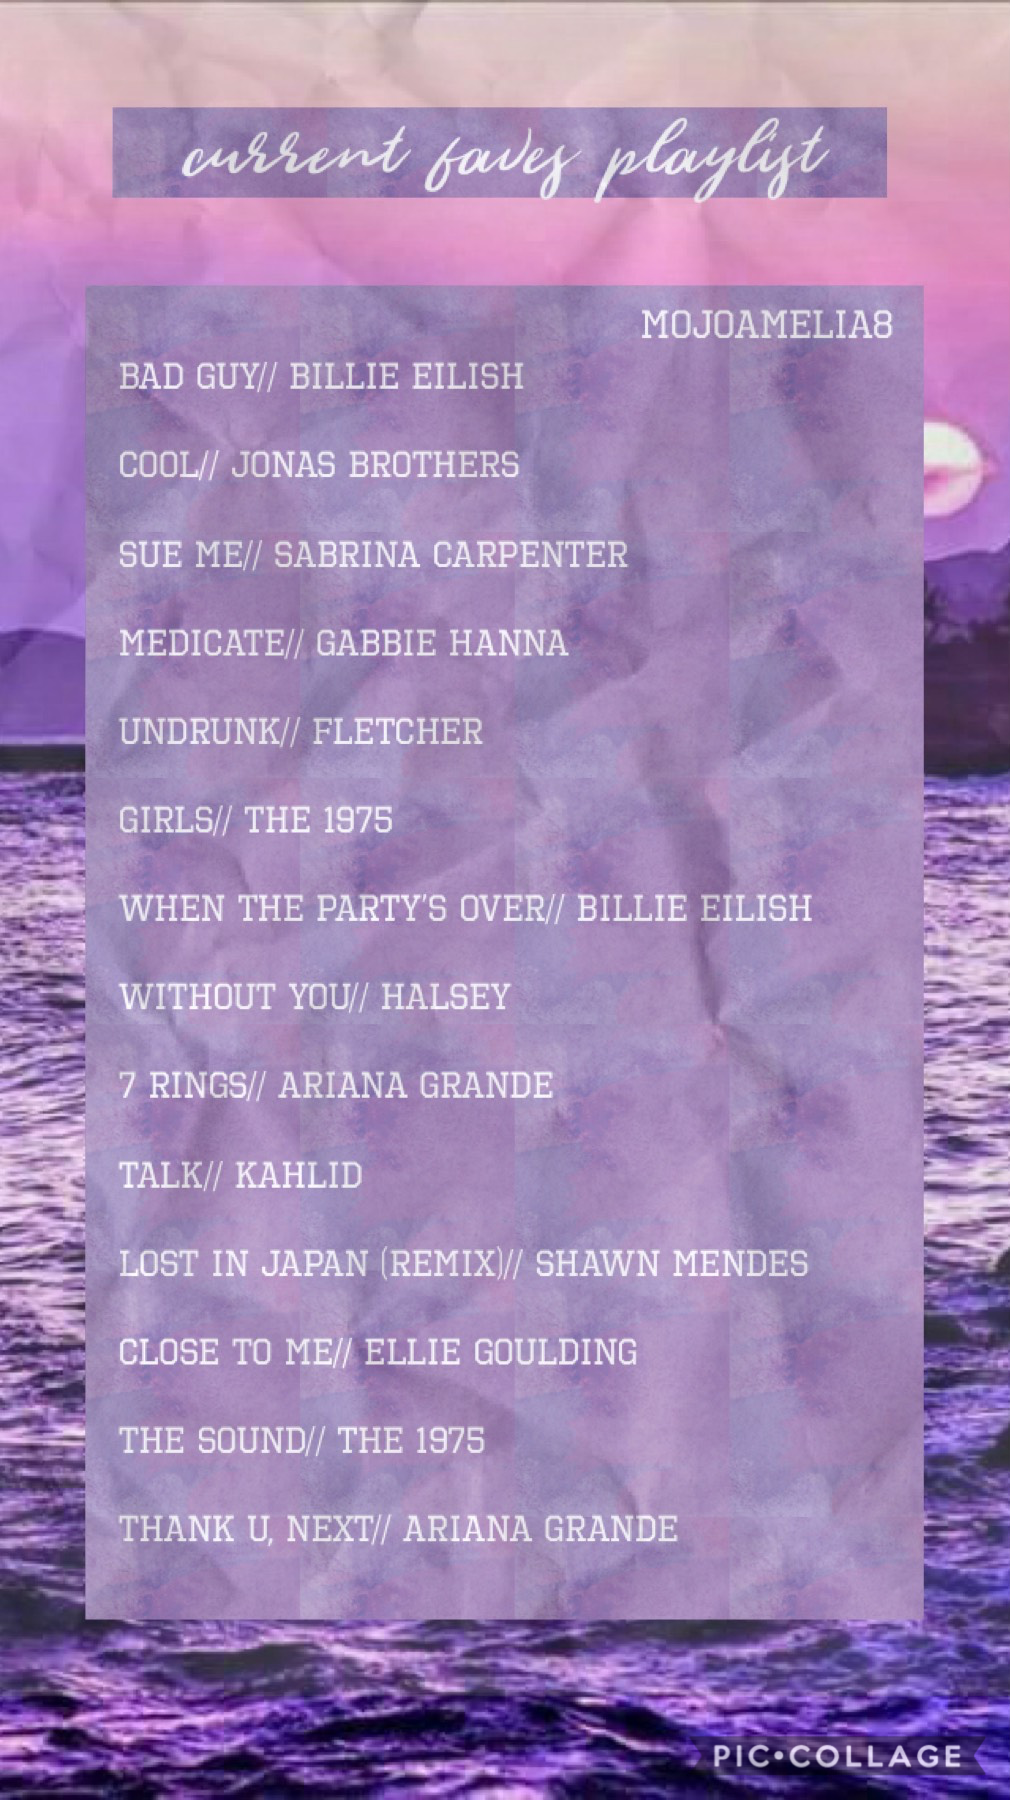 💜tap💜
here’s some of my current favorite songs :) some of these are older but most are newer. i hope you find a new fave song from these ;)